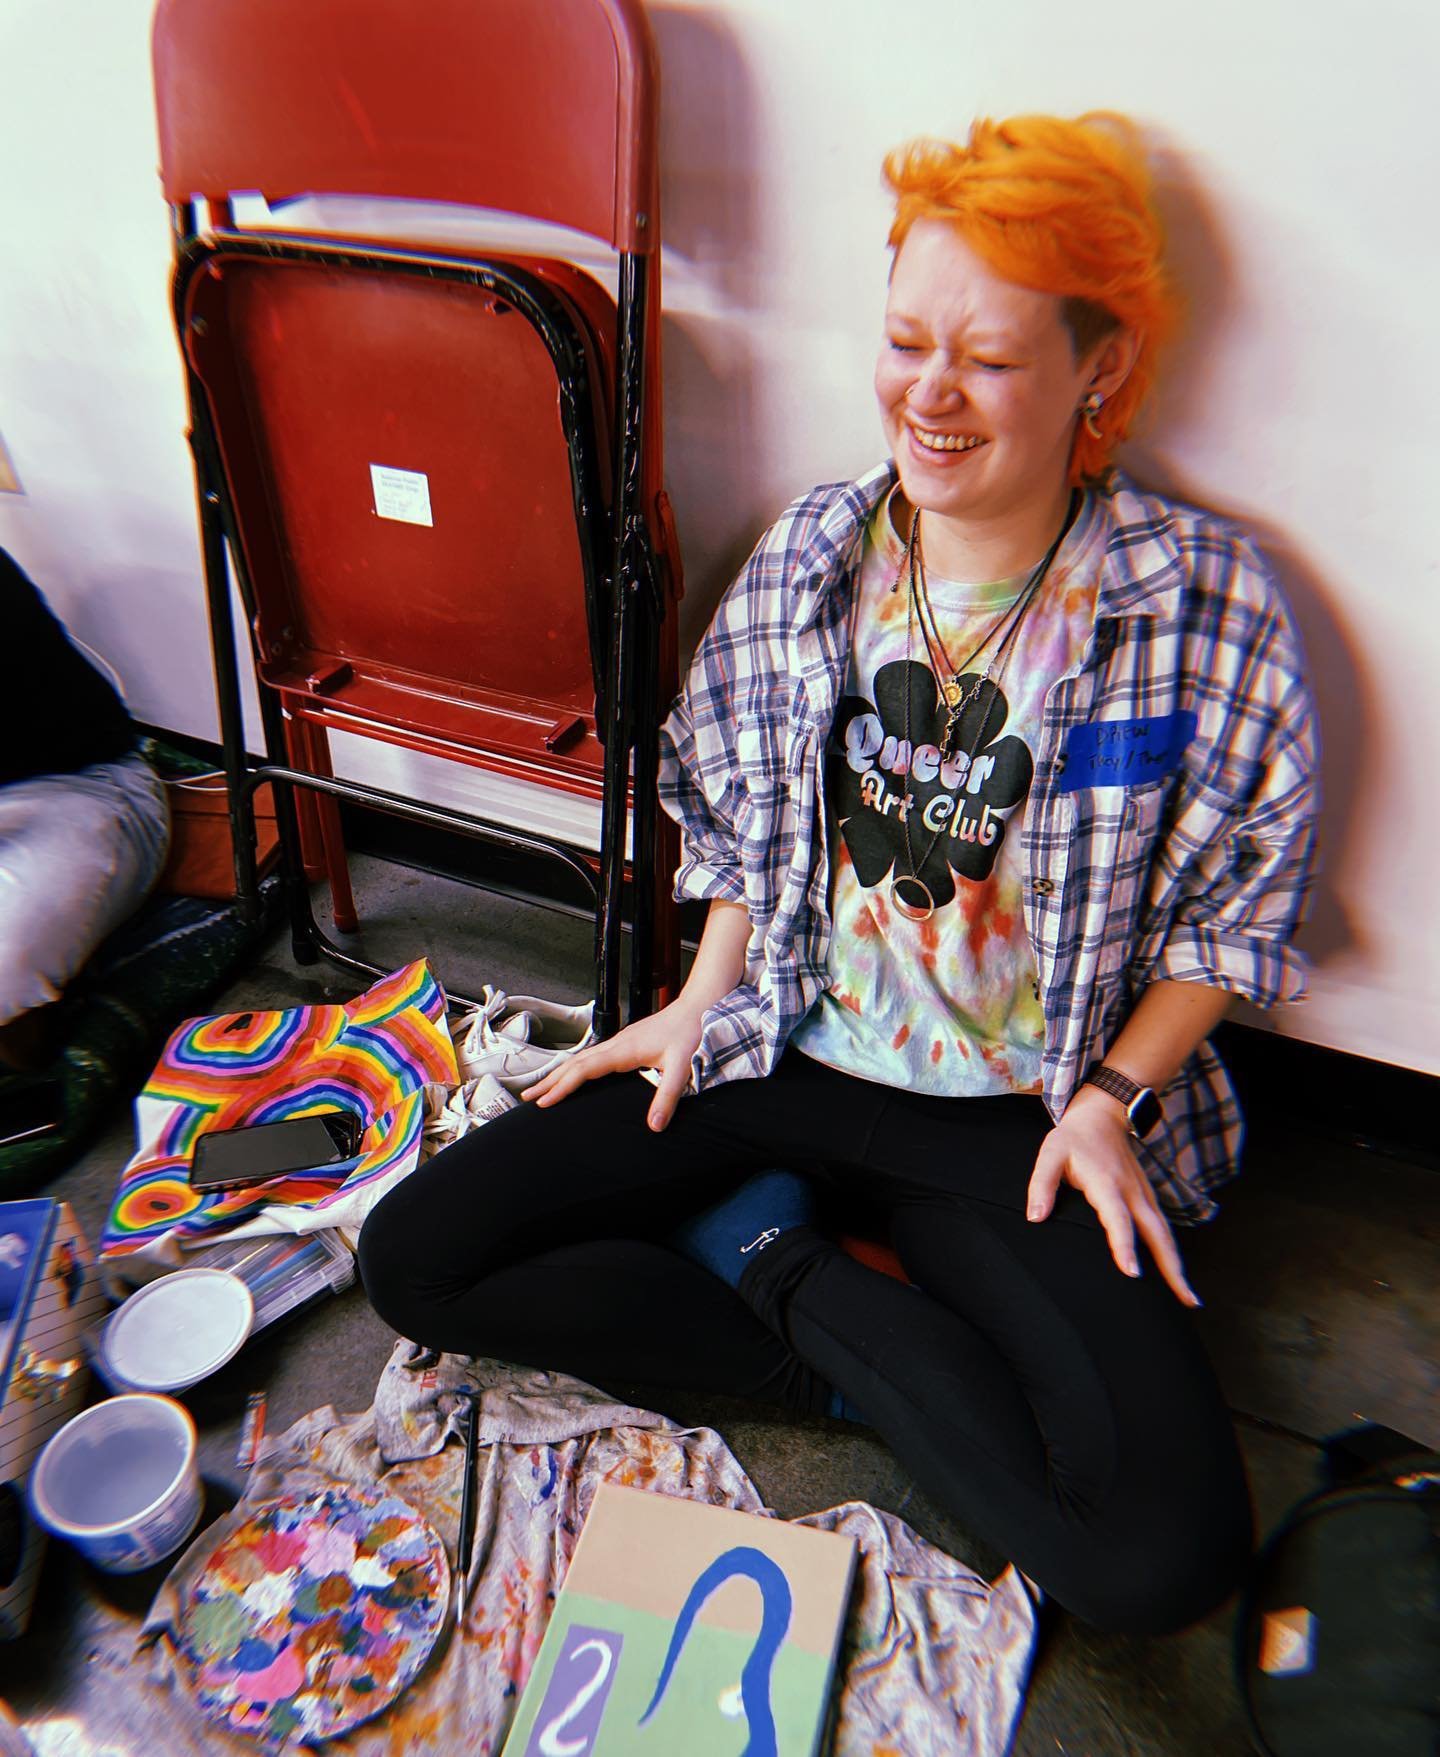 Member Spotlight: DREW (@peachessayshi_ )

Drew (they/them) has been a member of Queer Art Club since March 2022. We love the fun and friendly energy they bring to the group, as well as all their cute outfits and accessories! Drew is the artist behin